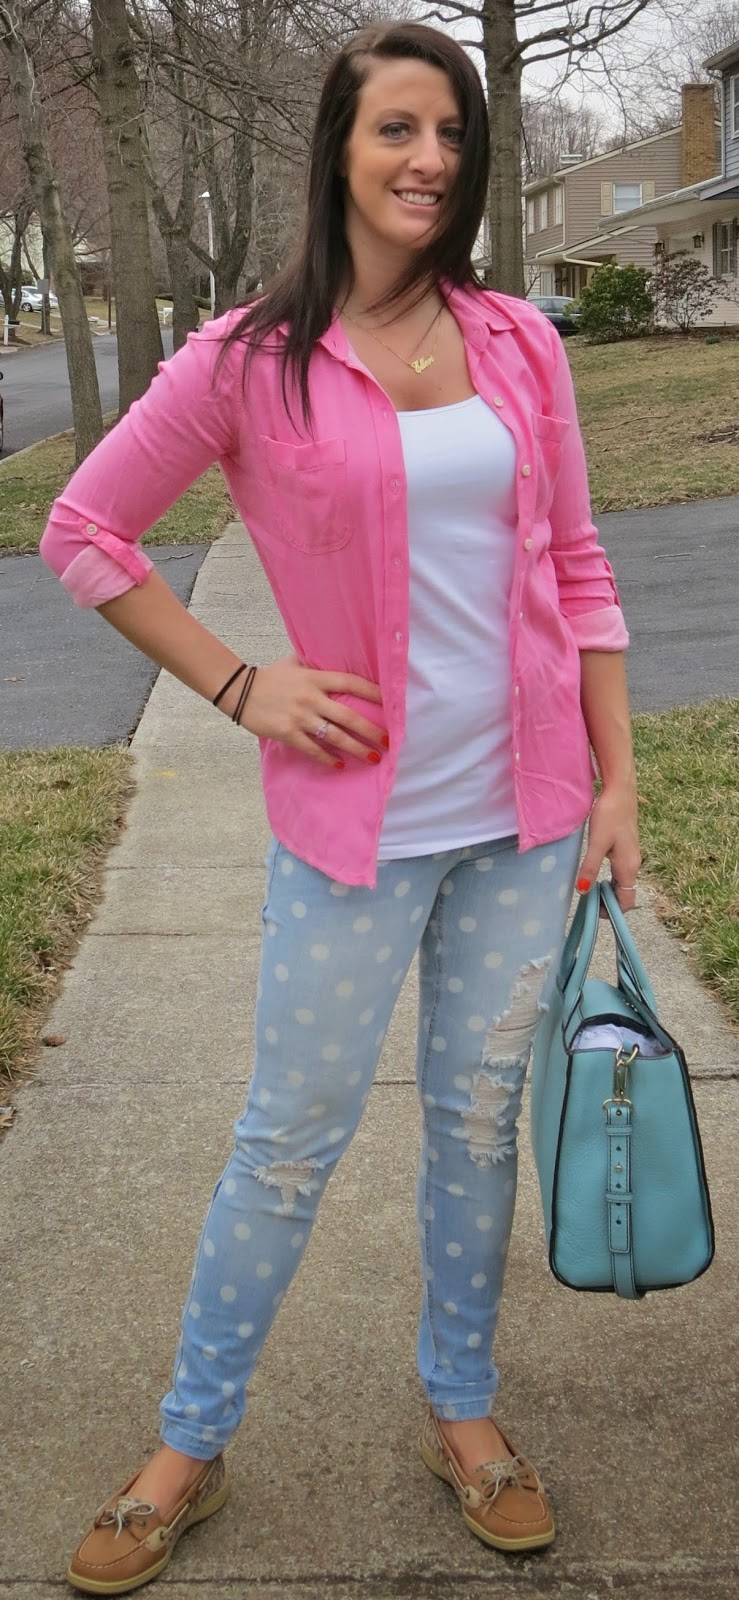 kate spade claremont bag, pink blouse, fashion, outfit, leopard sperrys, polka dot jeans